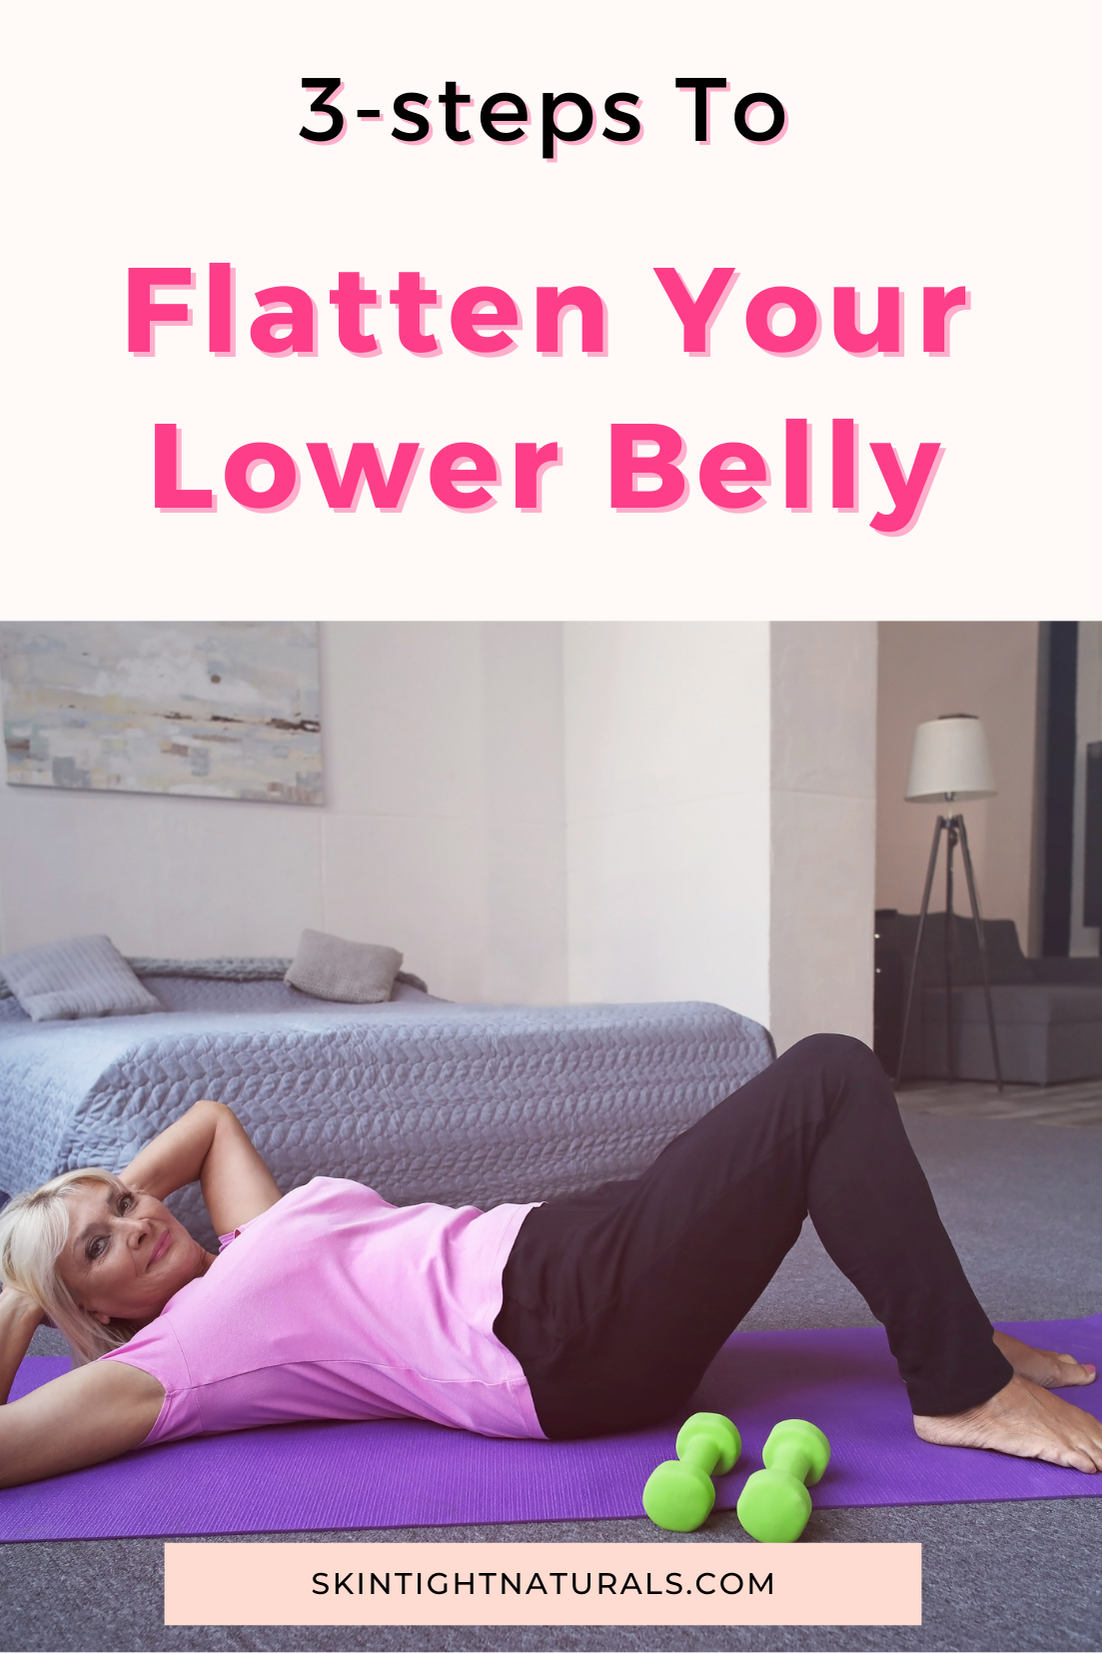 How To Flatten Your Lower Belly